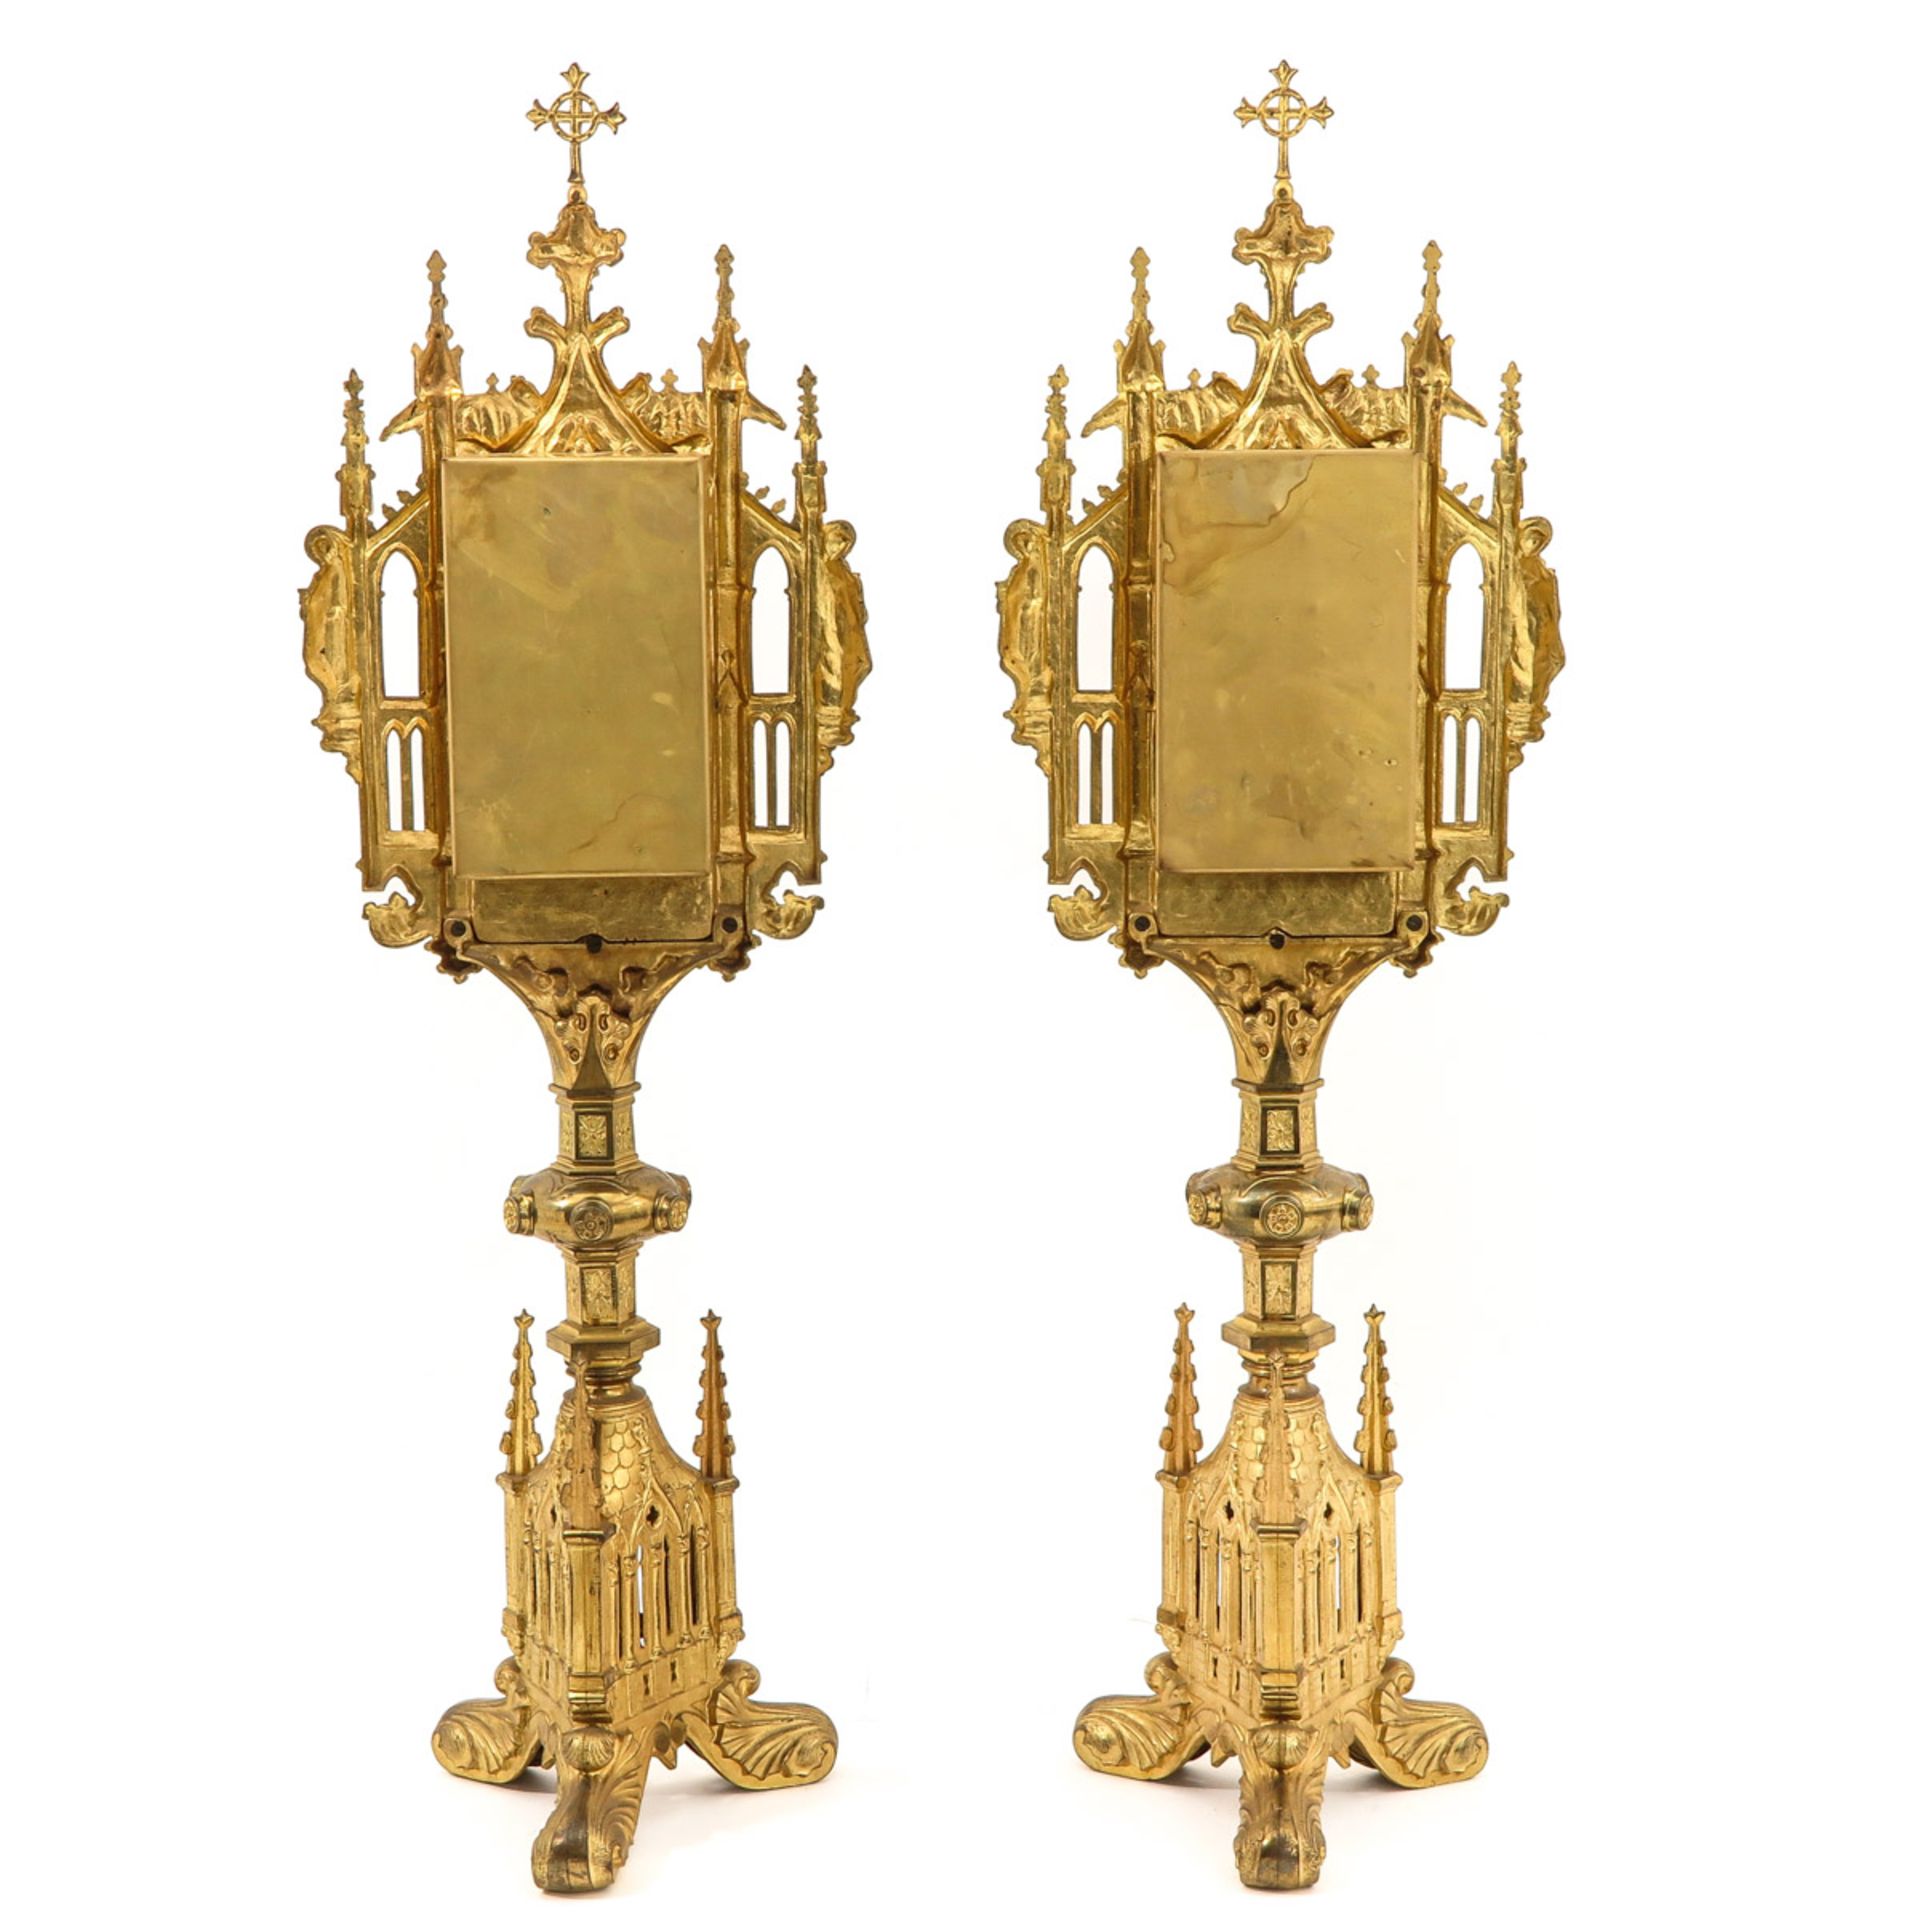 A Pair of Neo Gothic Gilded Reliquaries - Image 3 of 10